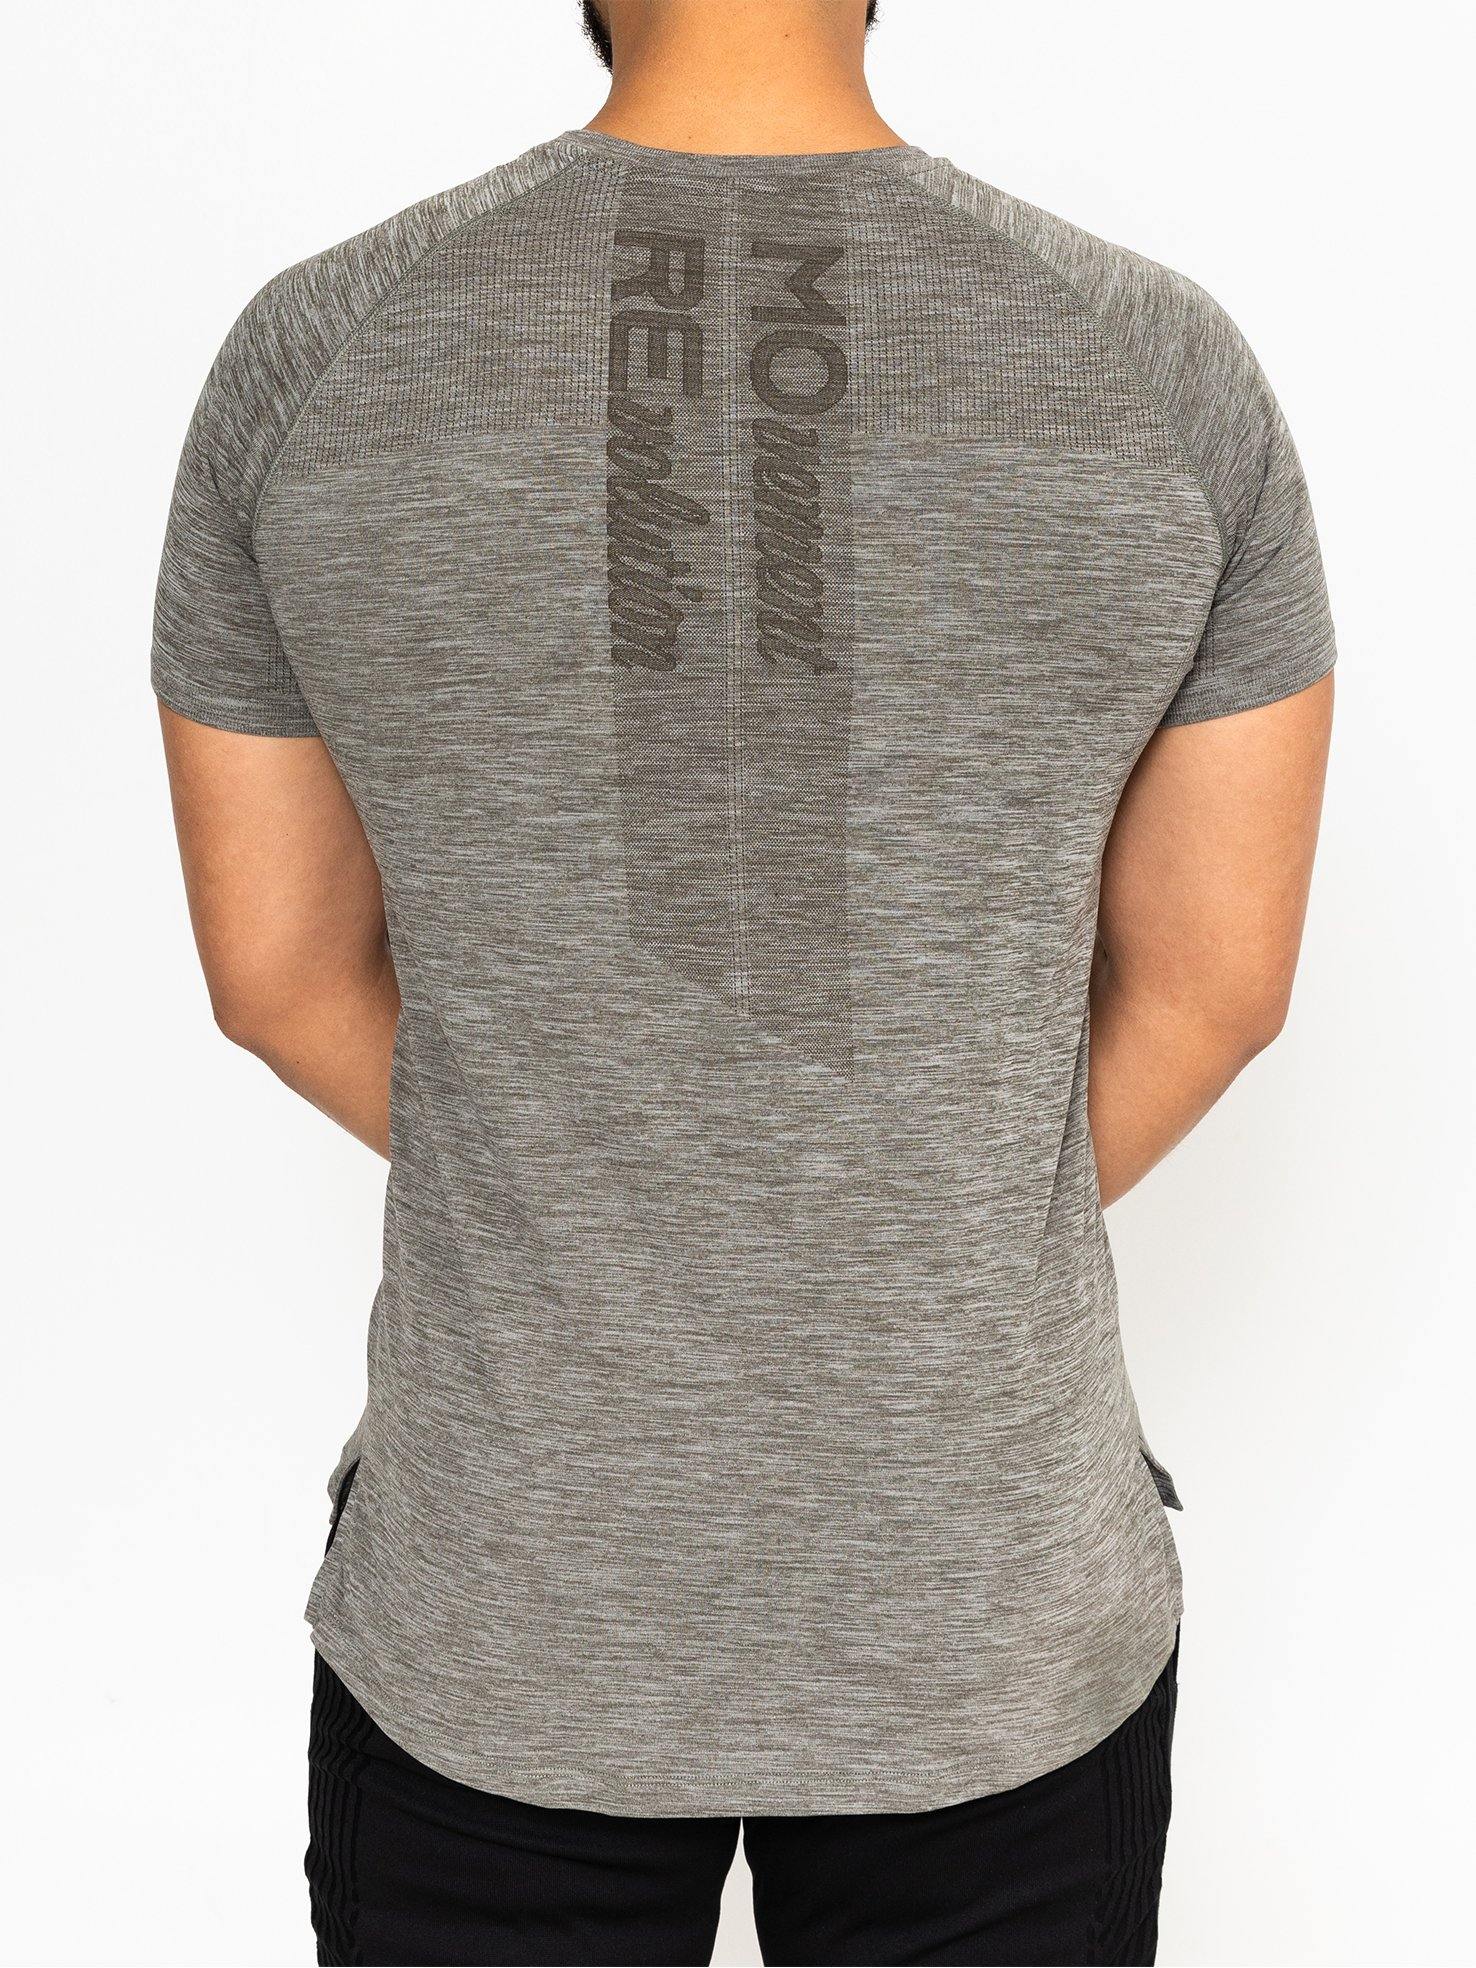 Ares Seamless Tee - Green - Movement Revolution